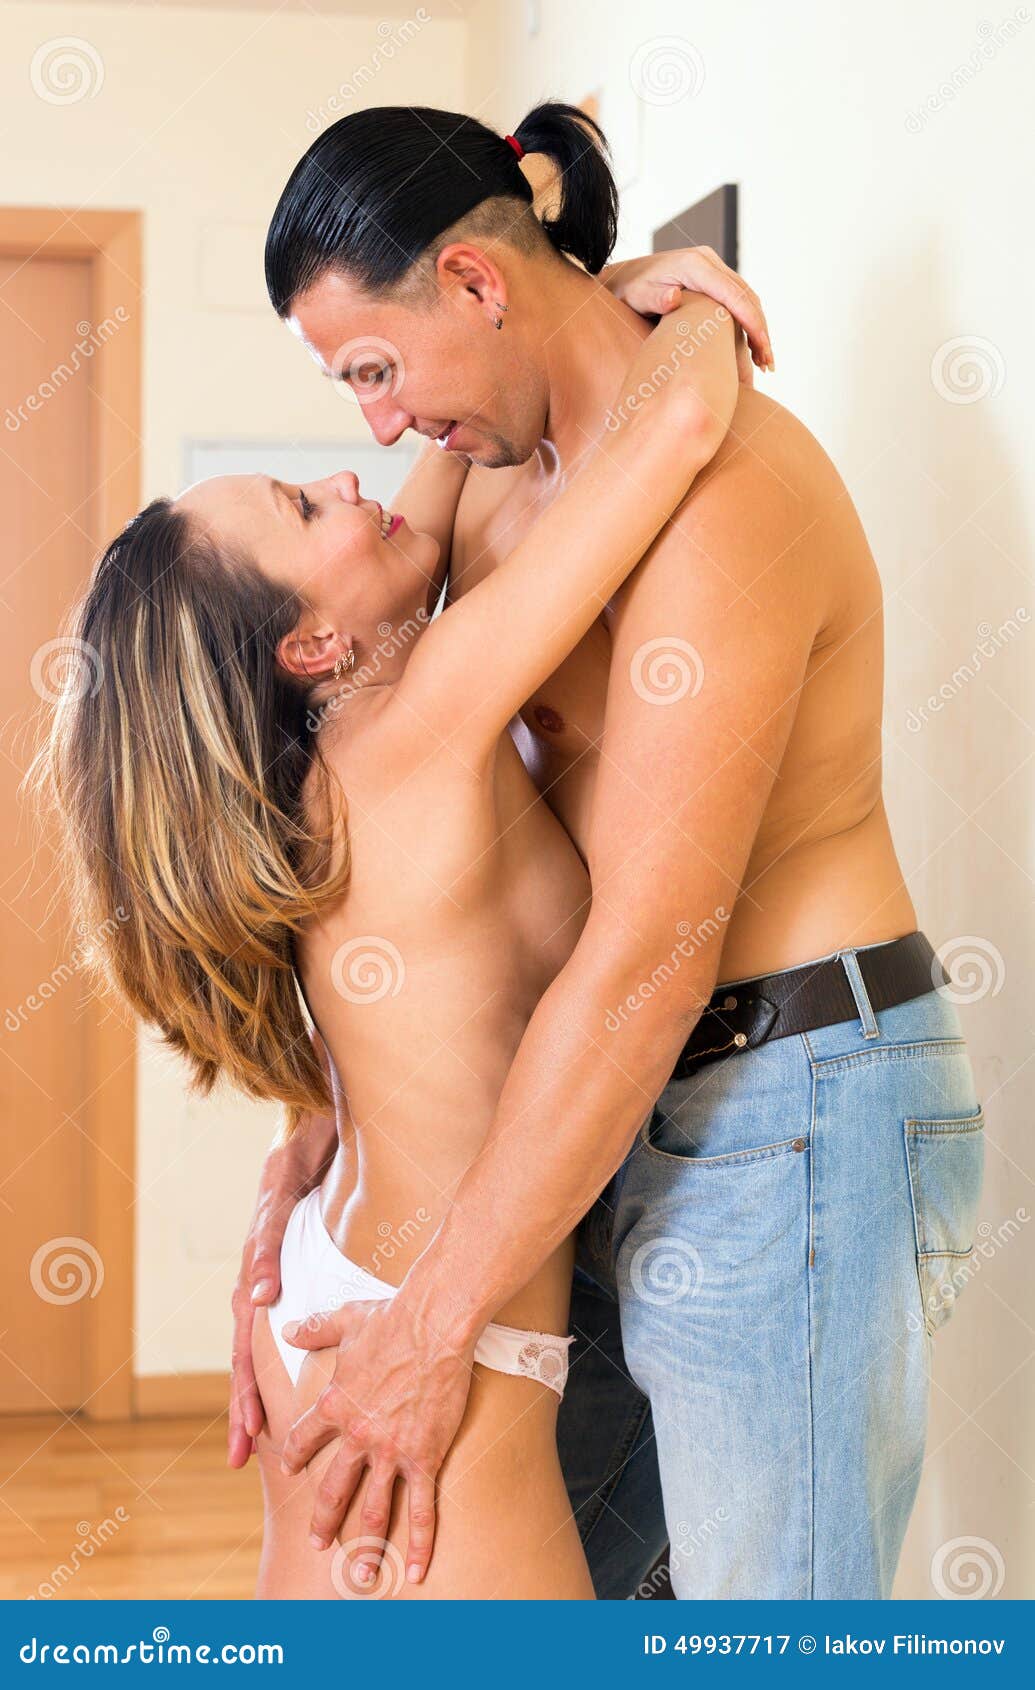 Adult couple having sex stock image picture